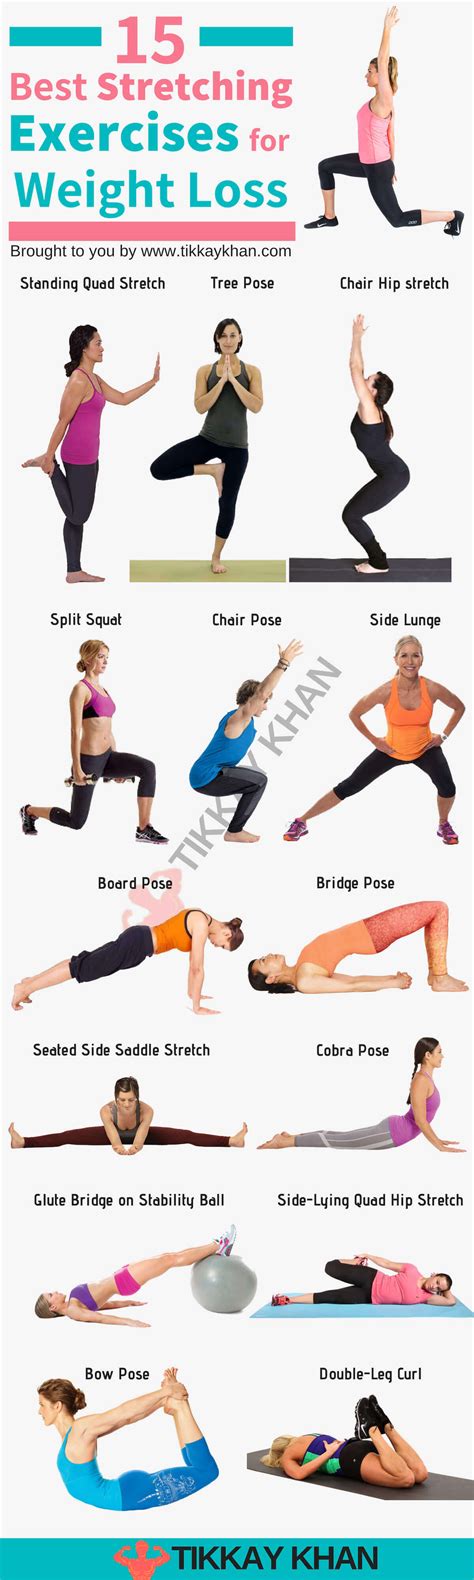 15 Best Stretching Exercises for Weight Loss   Tikkay Khan